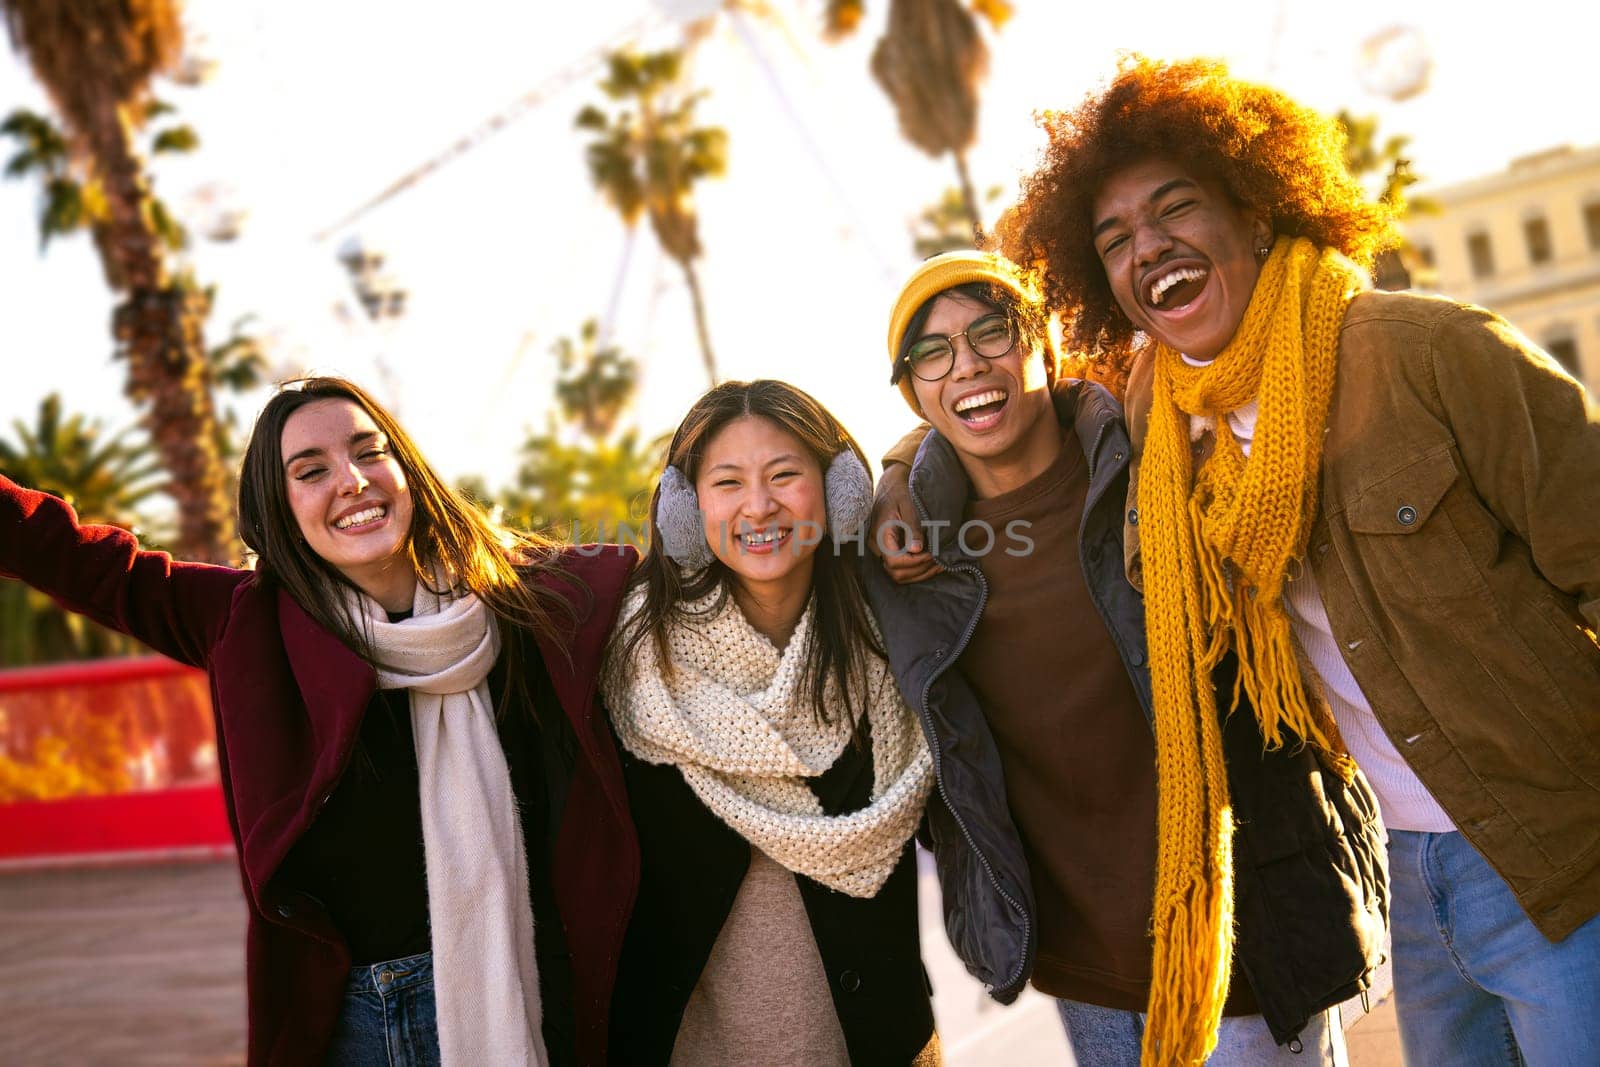 Happy multiethnic diverse group of friends looking at camera smiling on a sunny winter day outdoors.Lifestyle portrait concept.